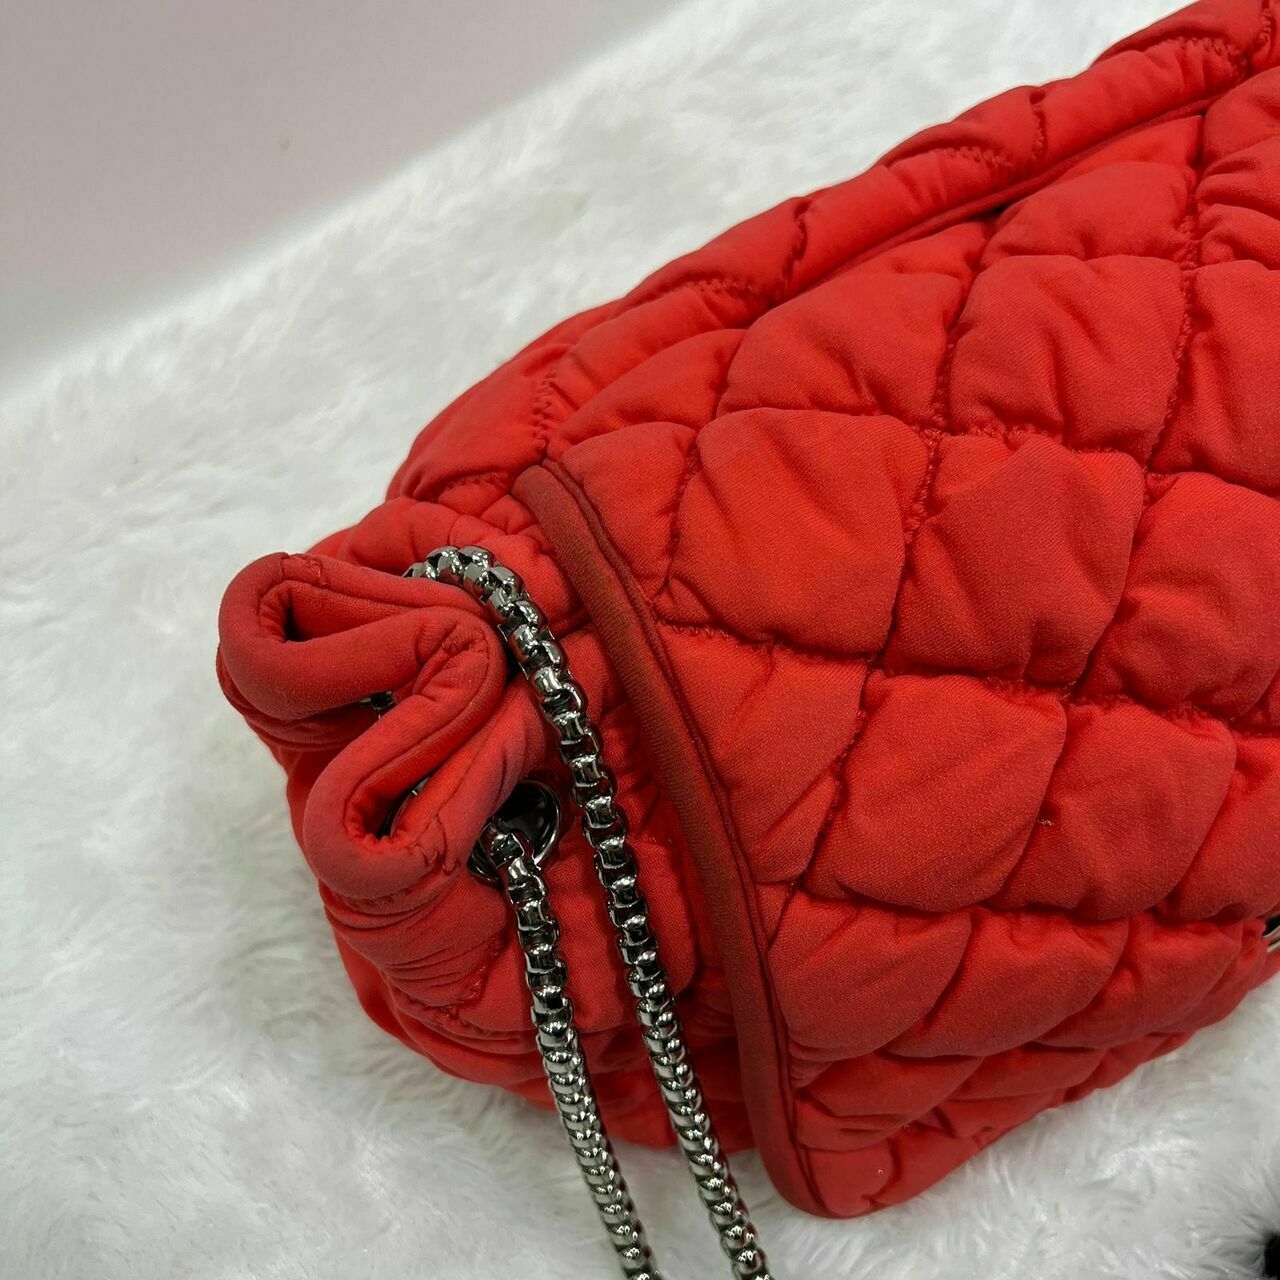 Chanel Red Bubble Accordion Quilted Nylon Flap Bag SHW #12 Shoulder Bag